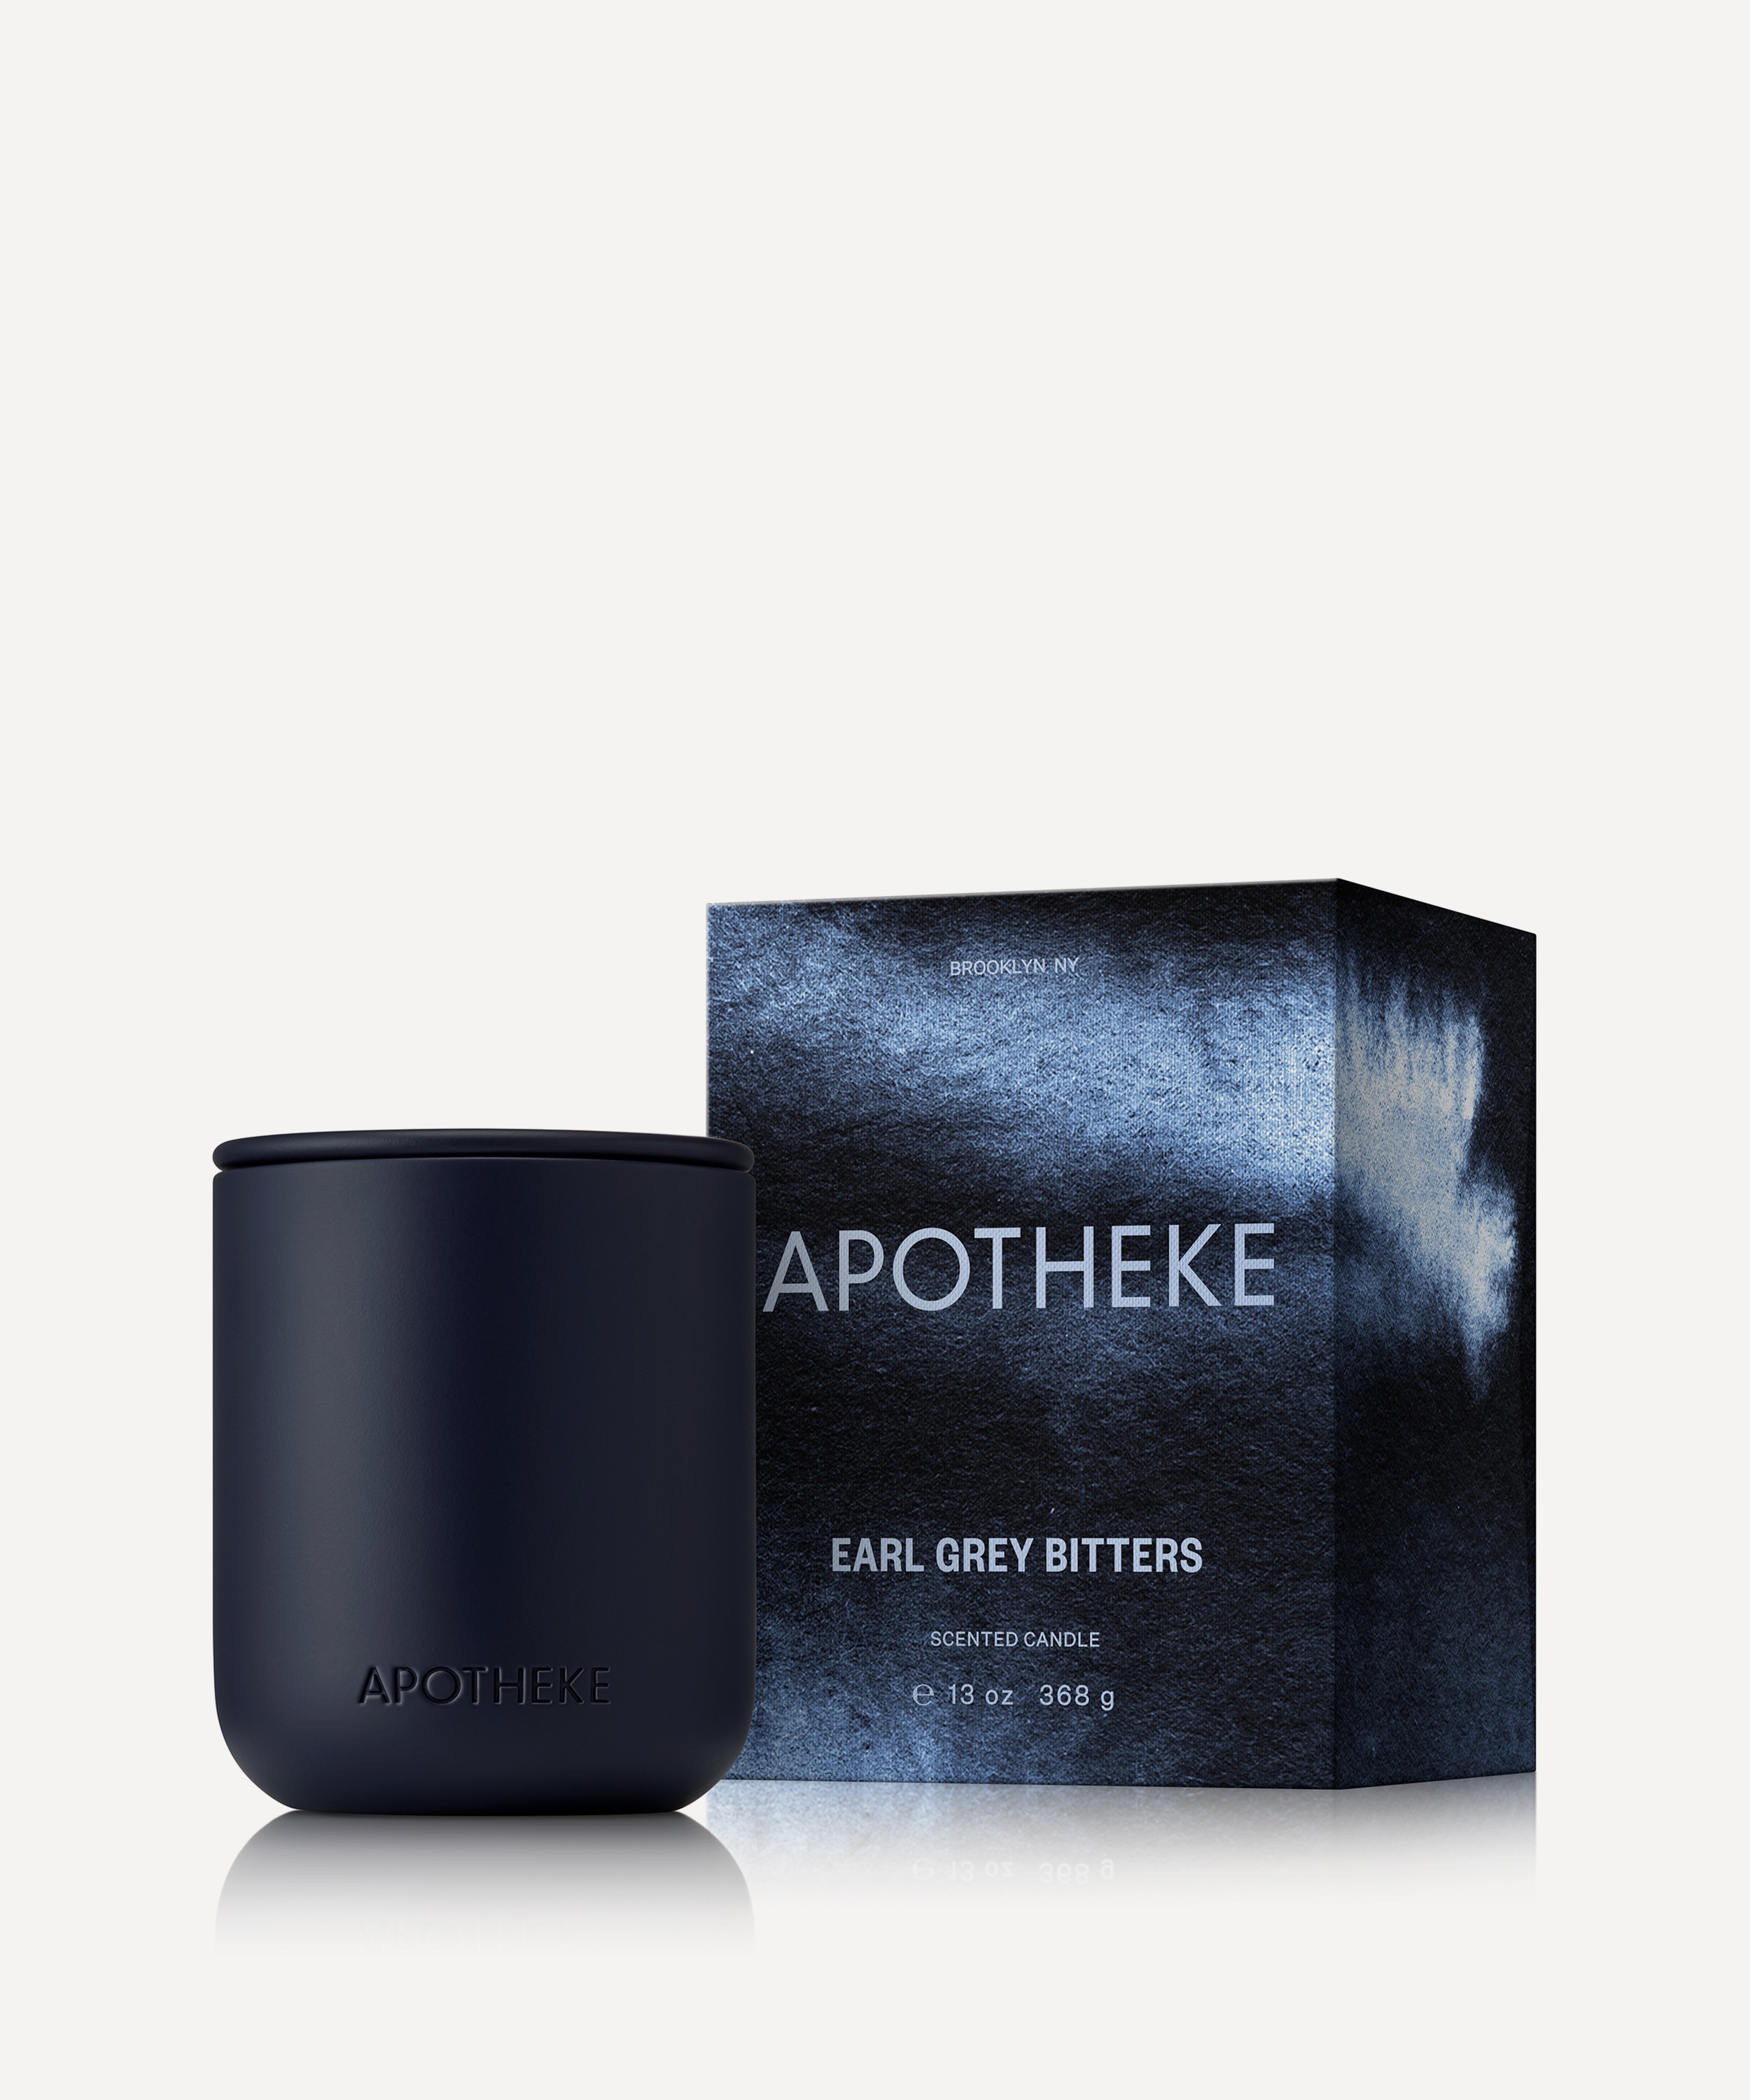 Apotheke - Earl Grey Bitters Two-Wick Ceramic Candle 370g image number 0